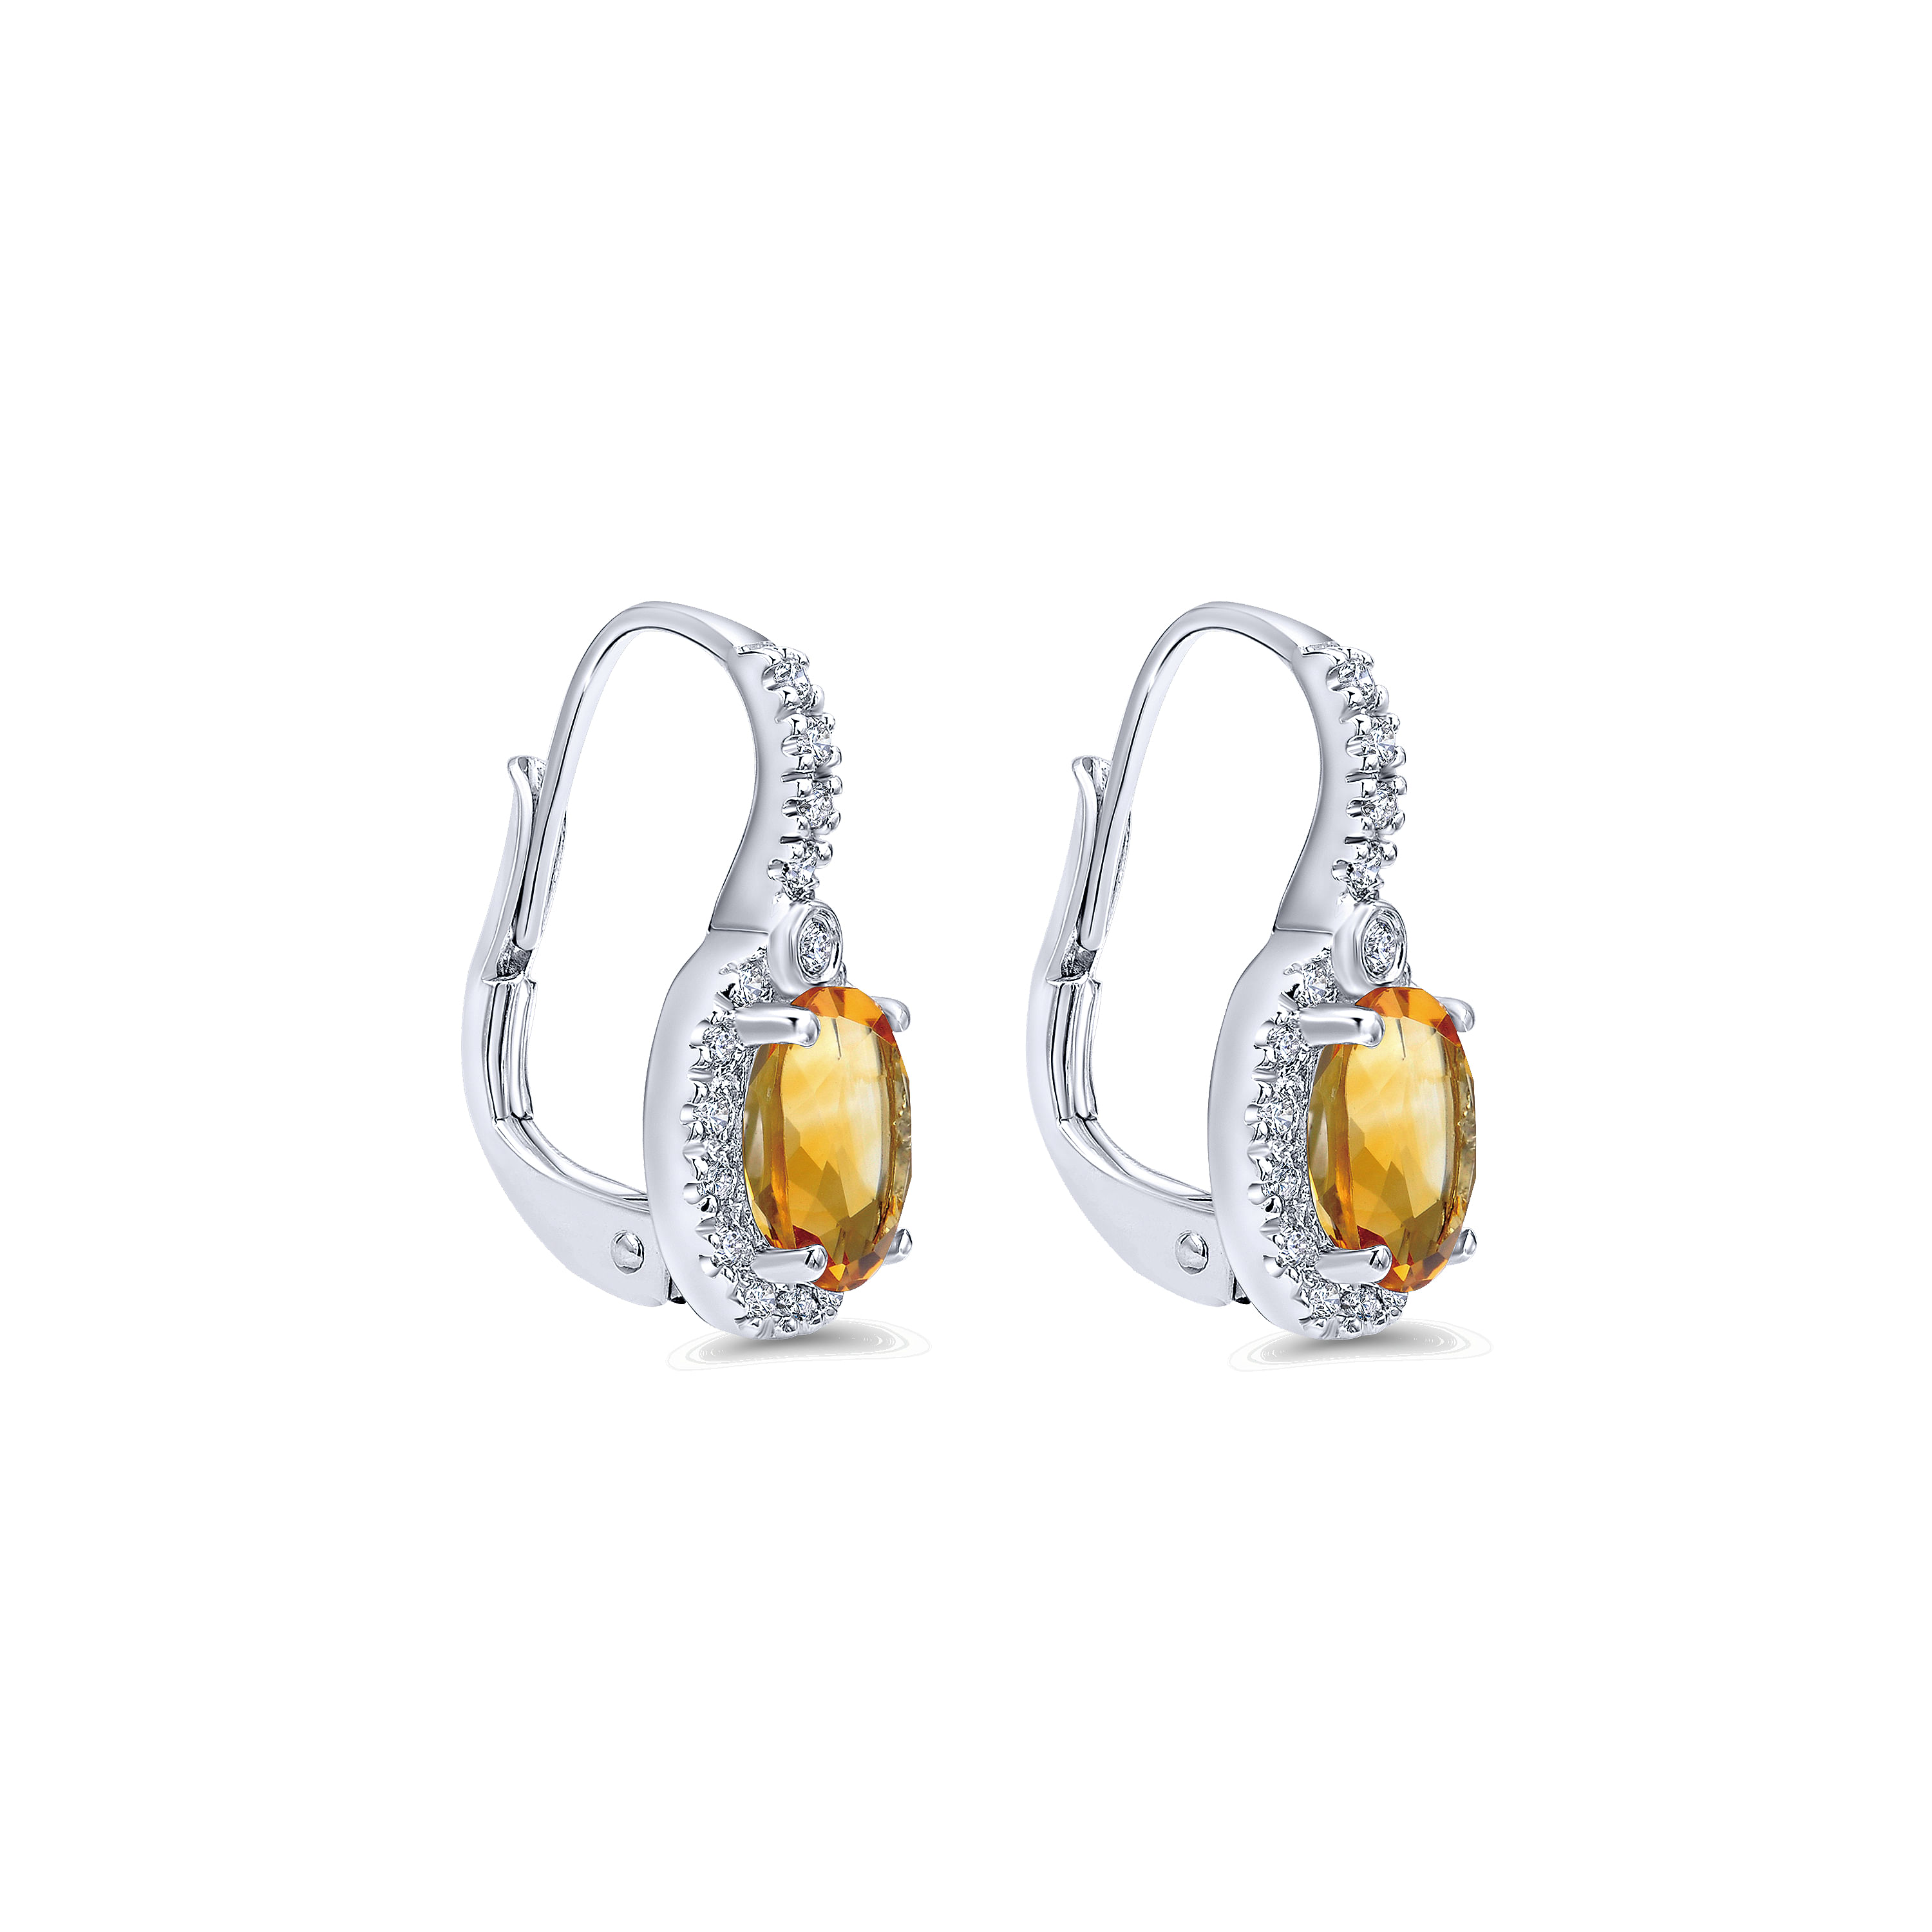 14K White Gold Oval Halo Citrine and Diamond Earrings